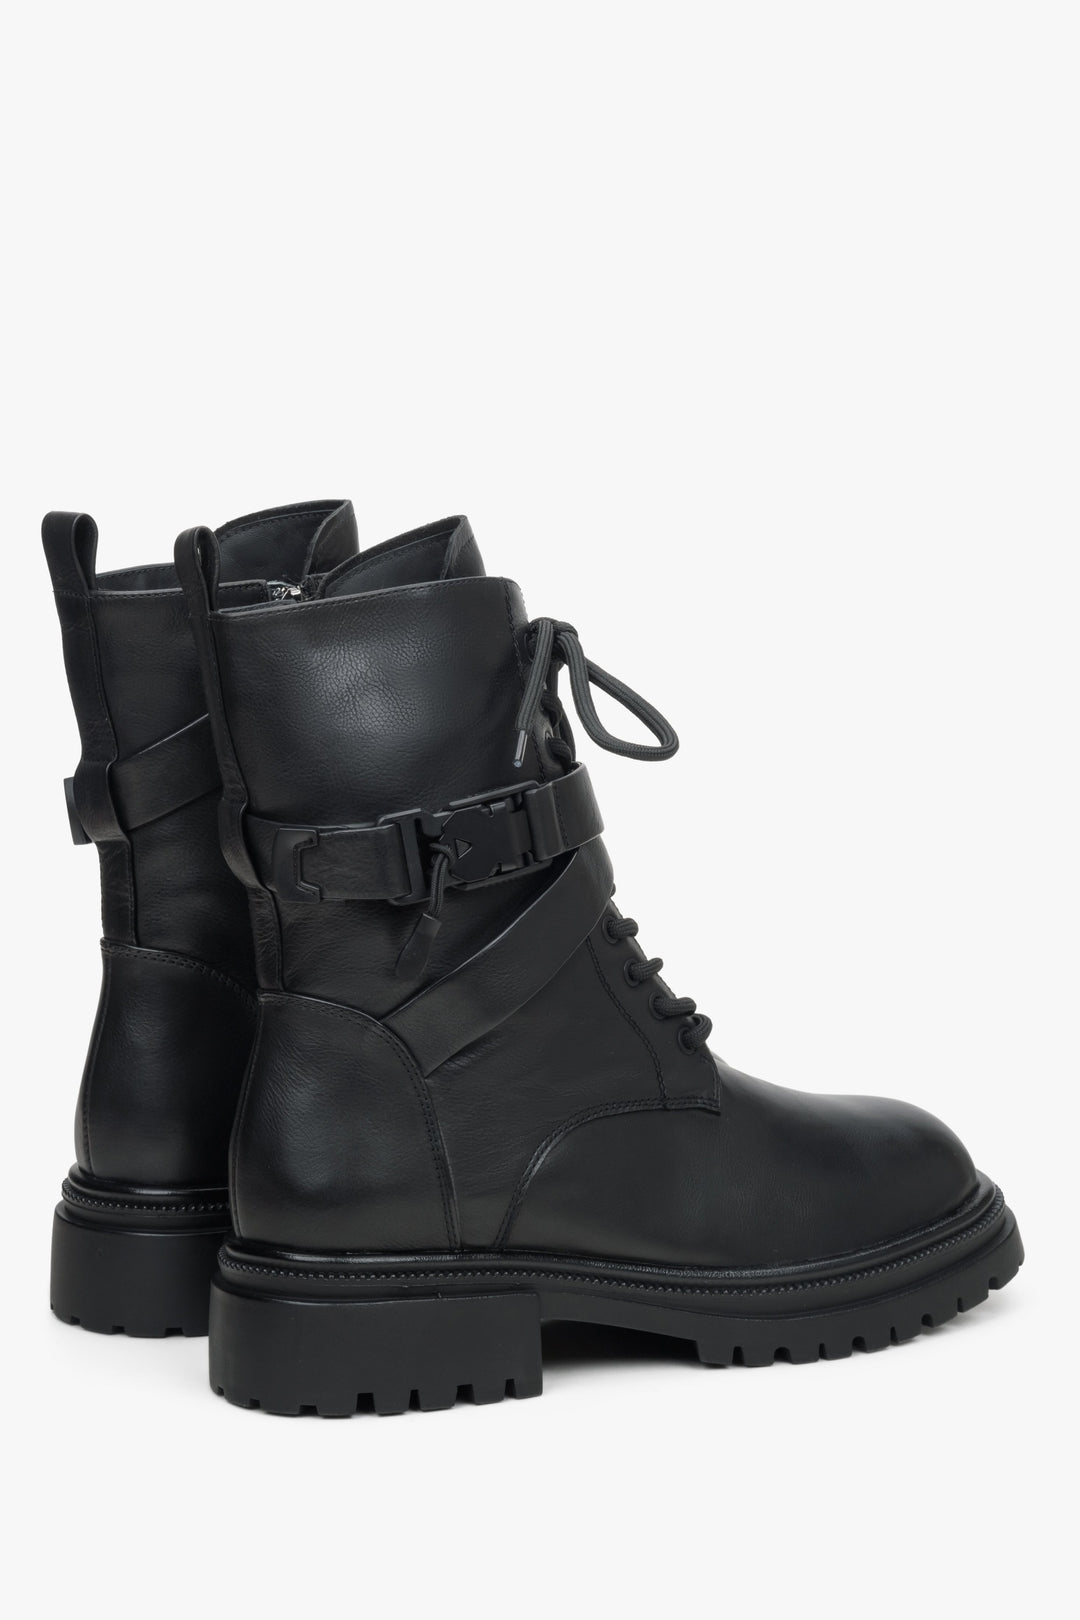 Women's insulated black winter boots by Estro - close-up on the side line and heel counters.